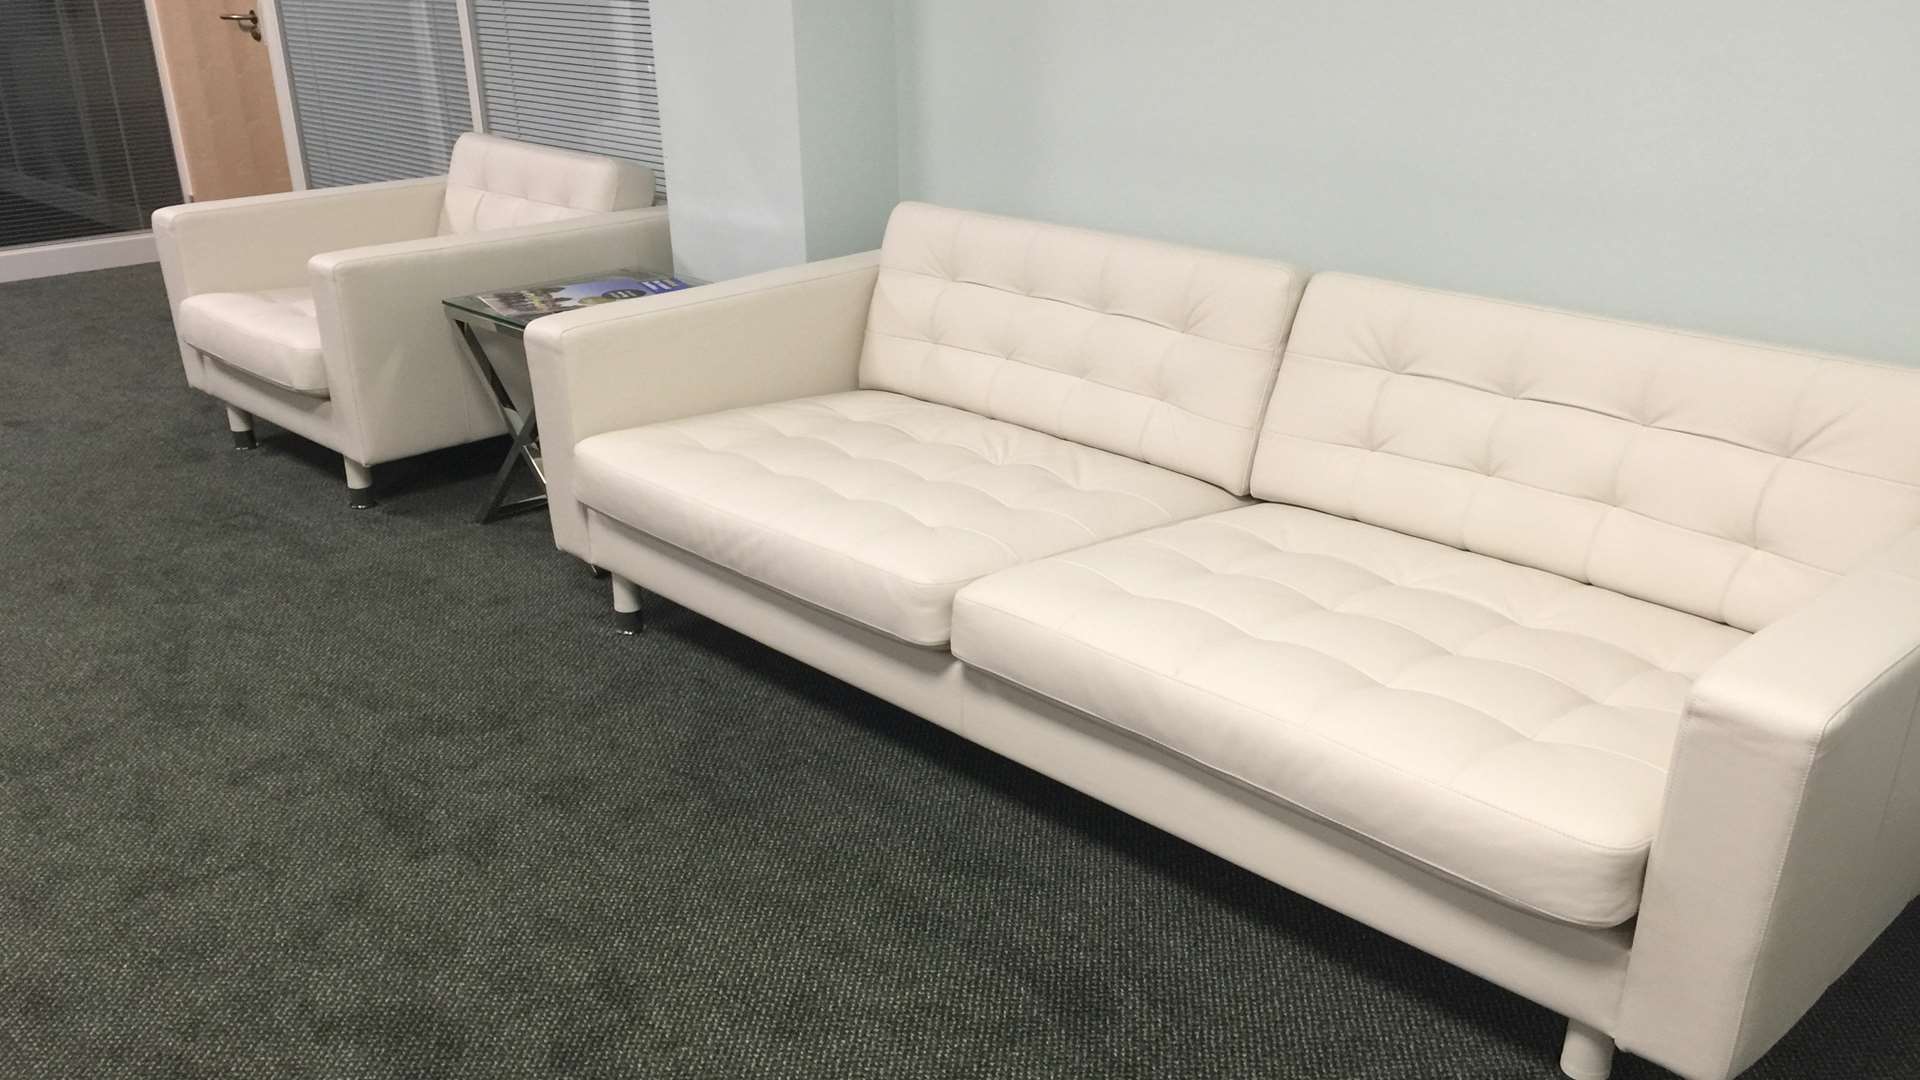 White leather sofas are seen in the reception area.